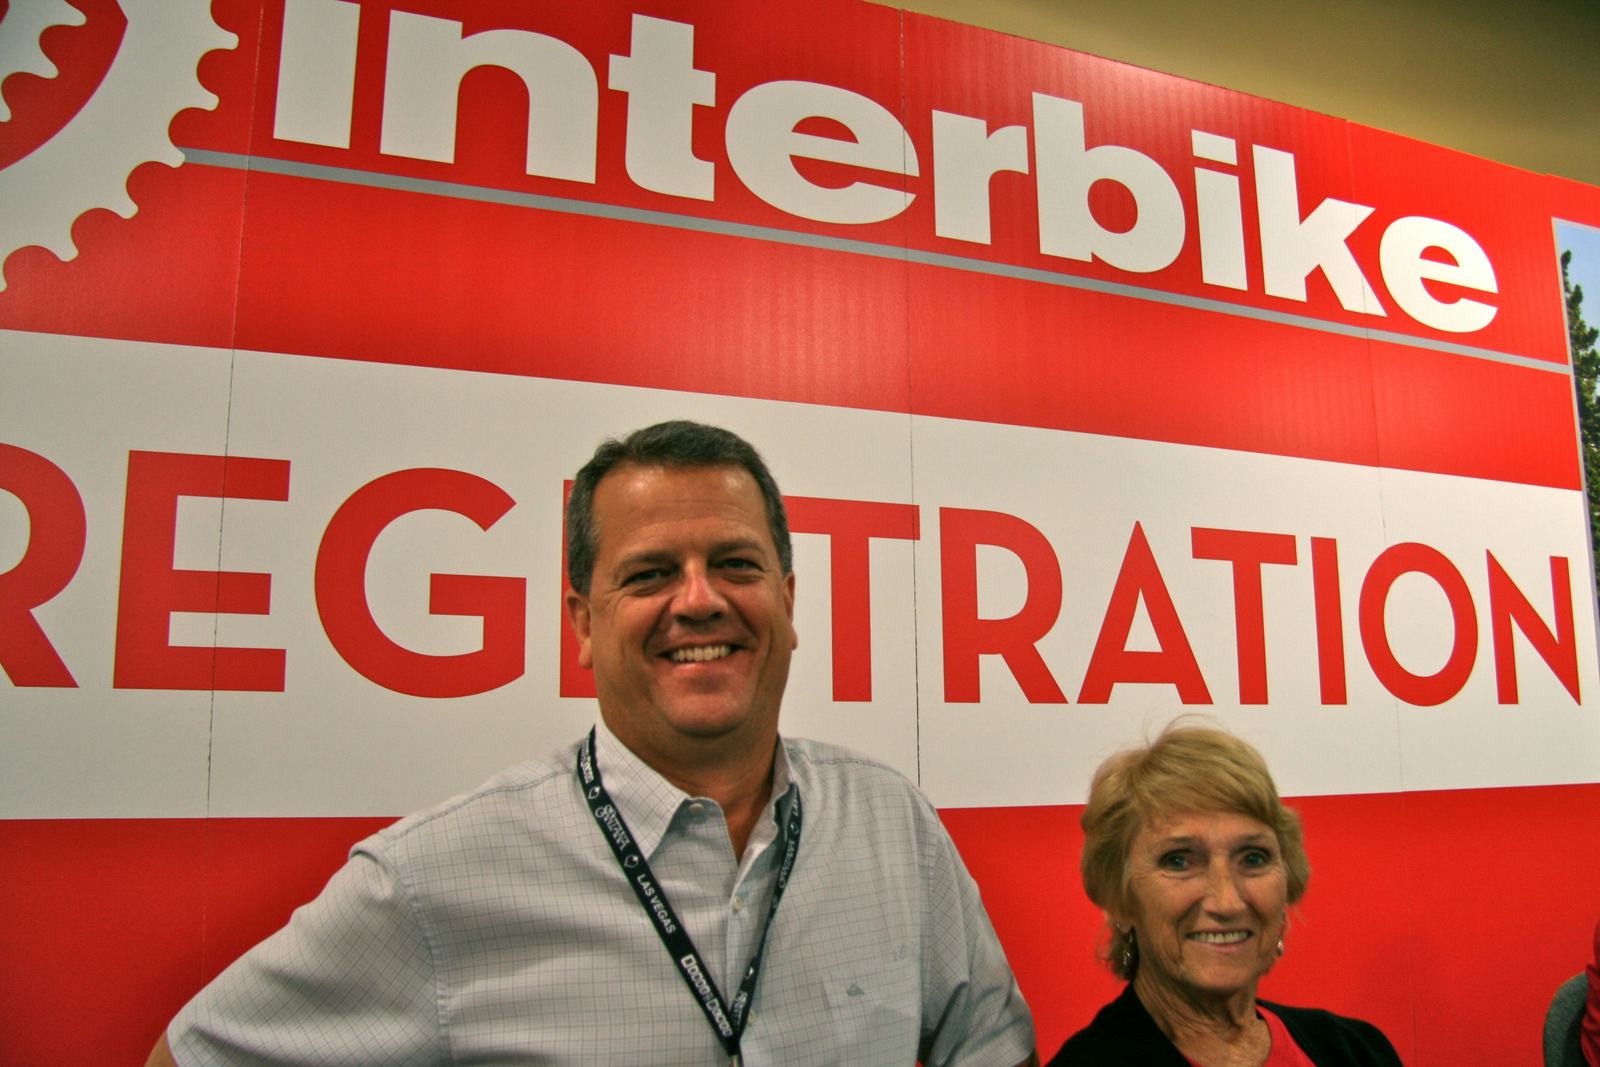 Interbike MD Pat Hus and his team seemed to have found the key for getting Interbike back on track as this year’s 31st show edition was the largest ever.
